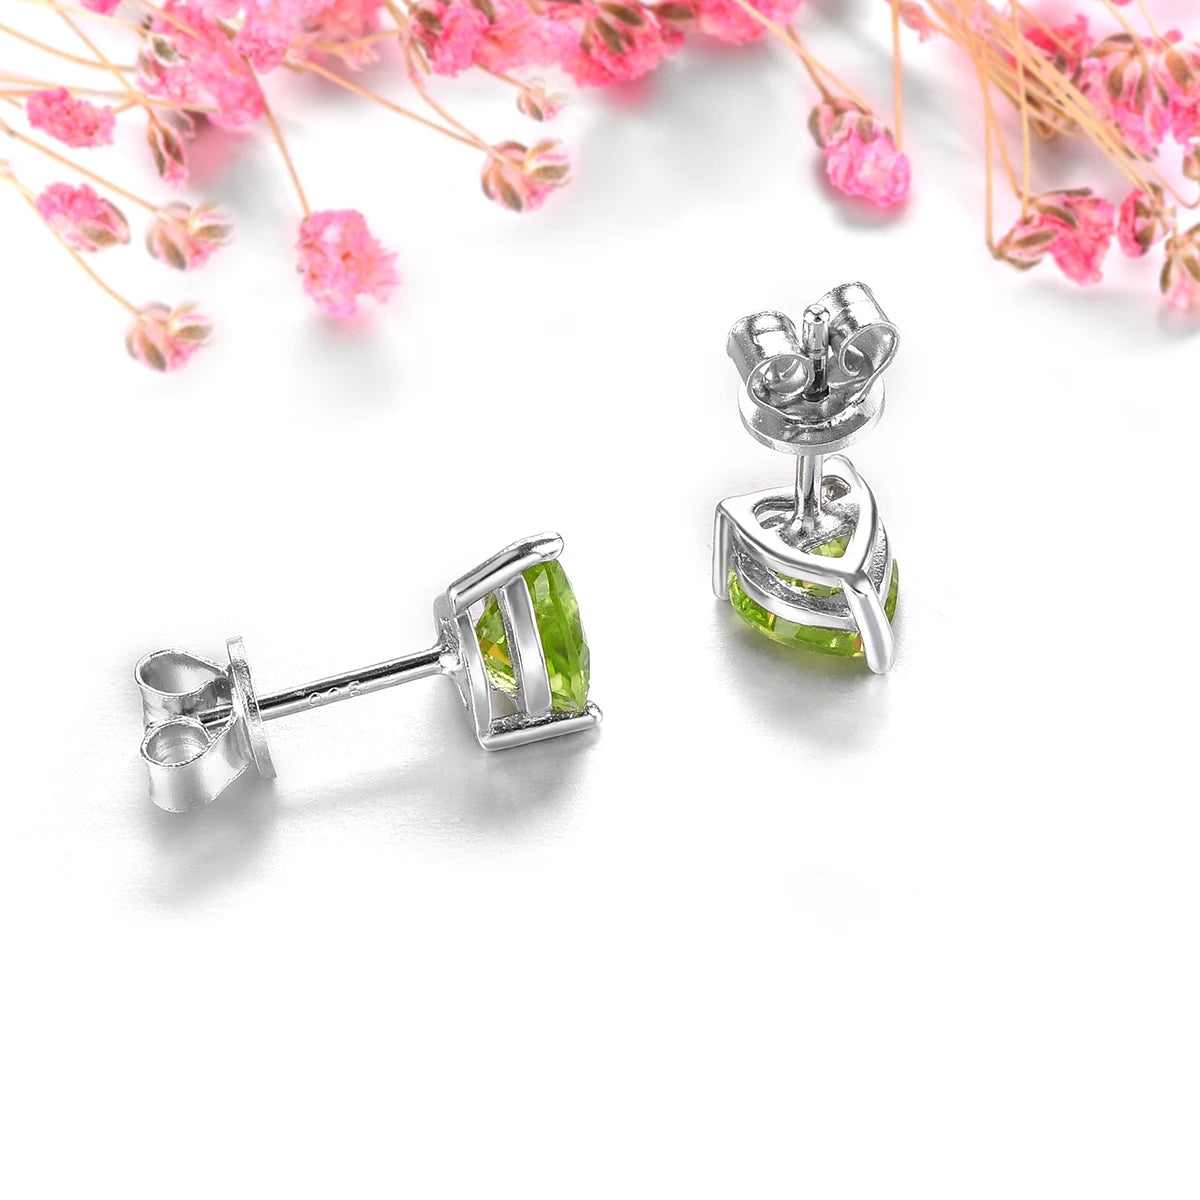 Natural Peridot Sterling Silver Stud Earring 1.6 Carats Genuine Gemstone Romantic Heart Design Casual Jewelry Birthday Gifts